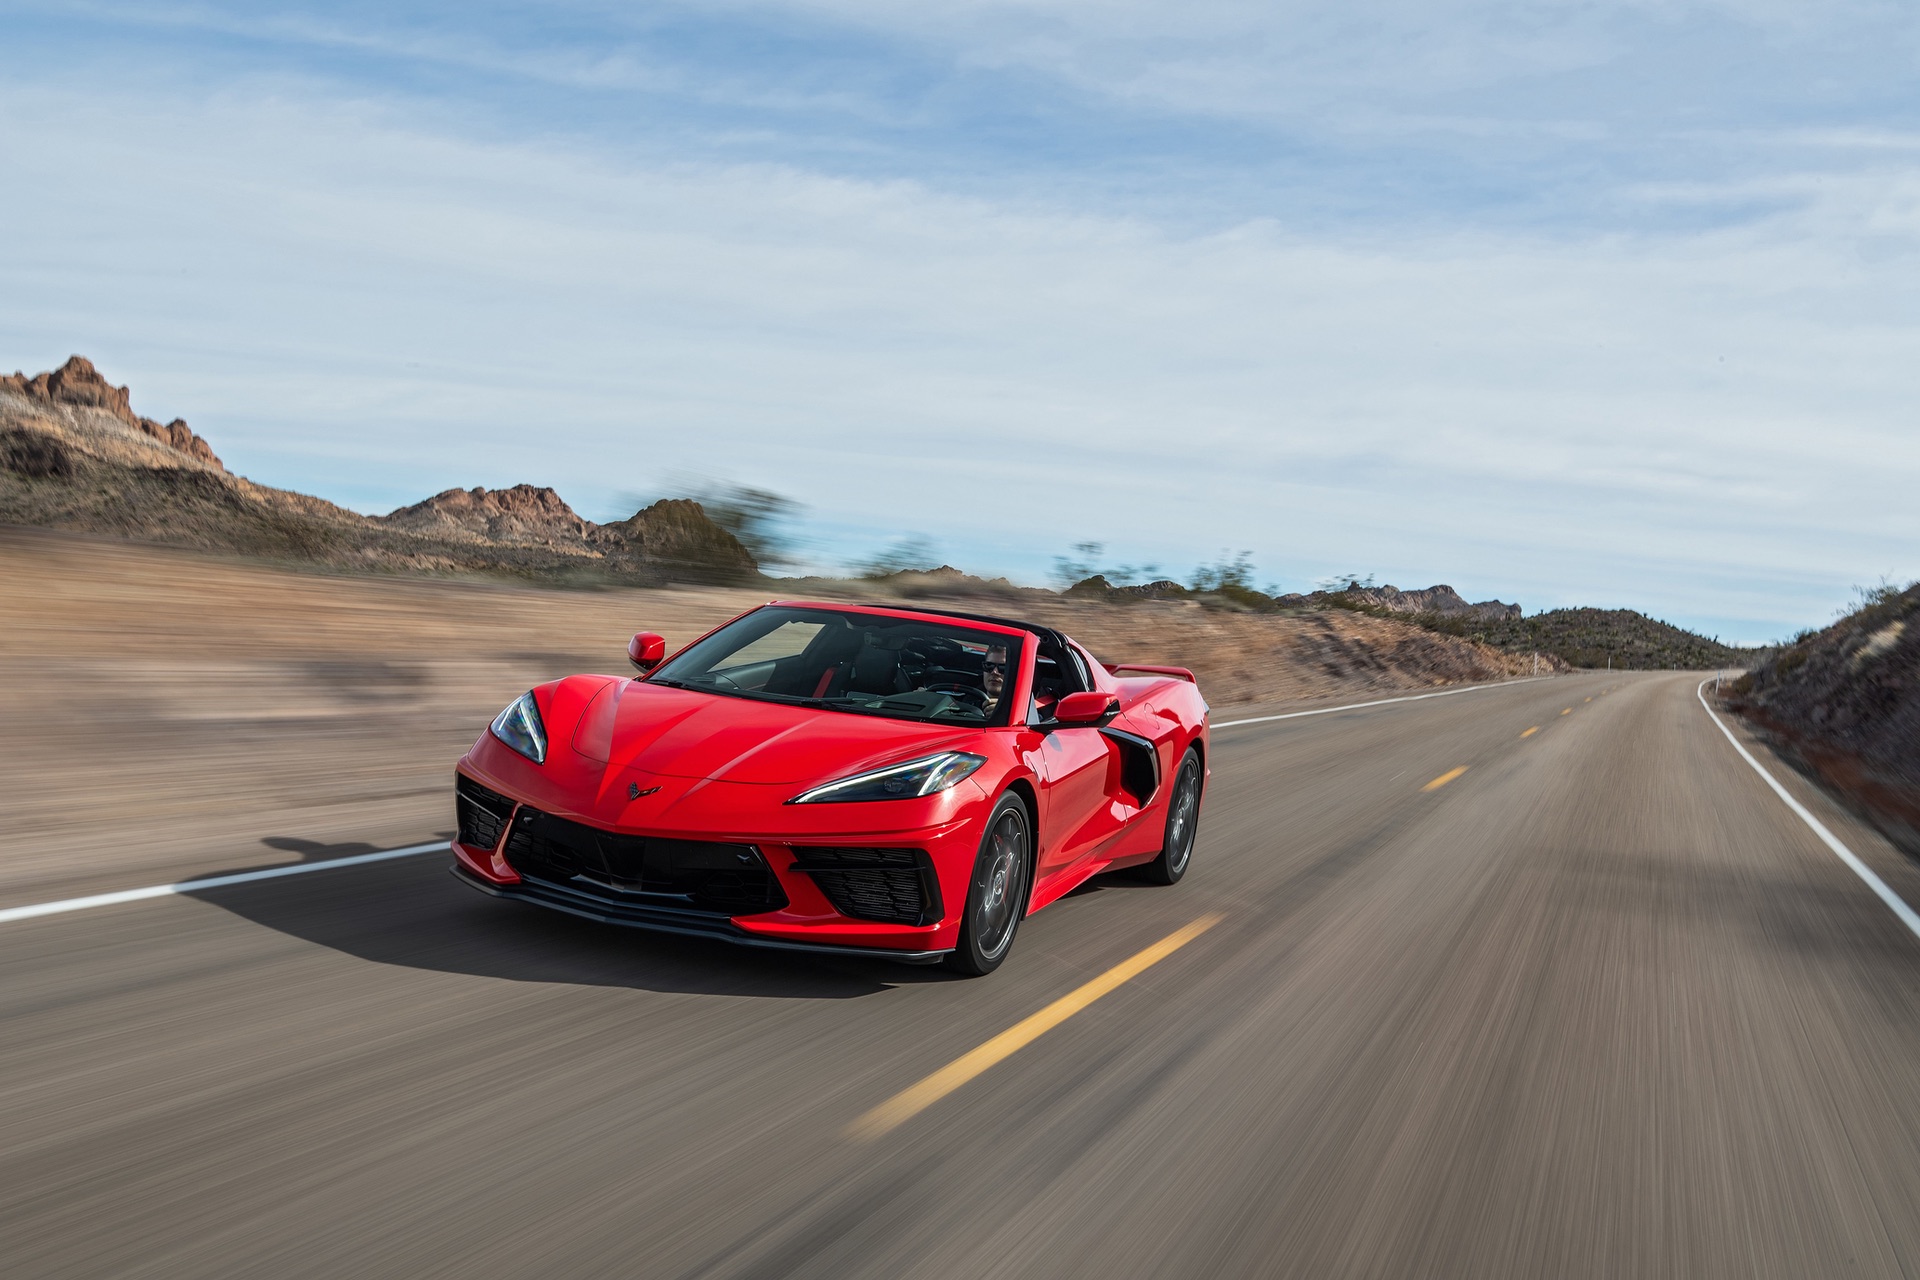 Win A C8 Corvette In The GM Aftersales ‘Dream Machine’ Promotion